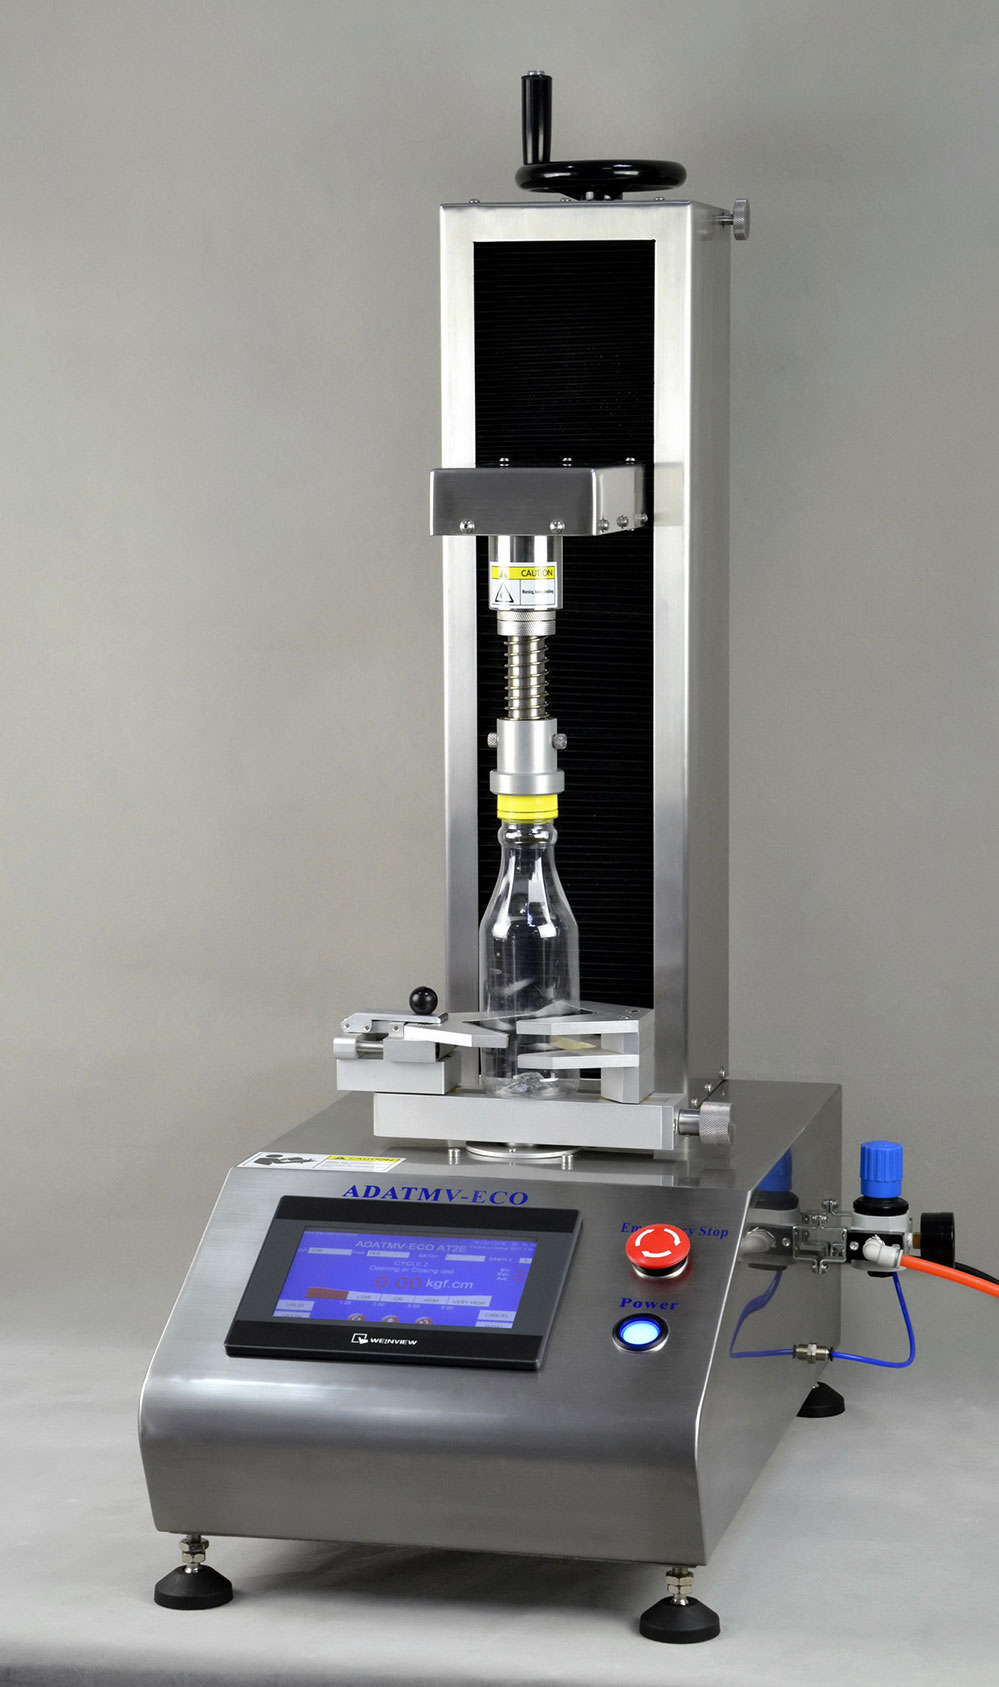 ADATMV ECO – Semi-Automated Torque Tester (Comply with the requirements of FDA – CFR 21-11)-image